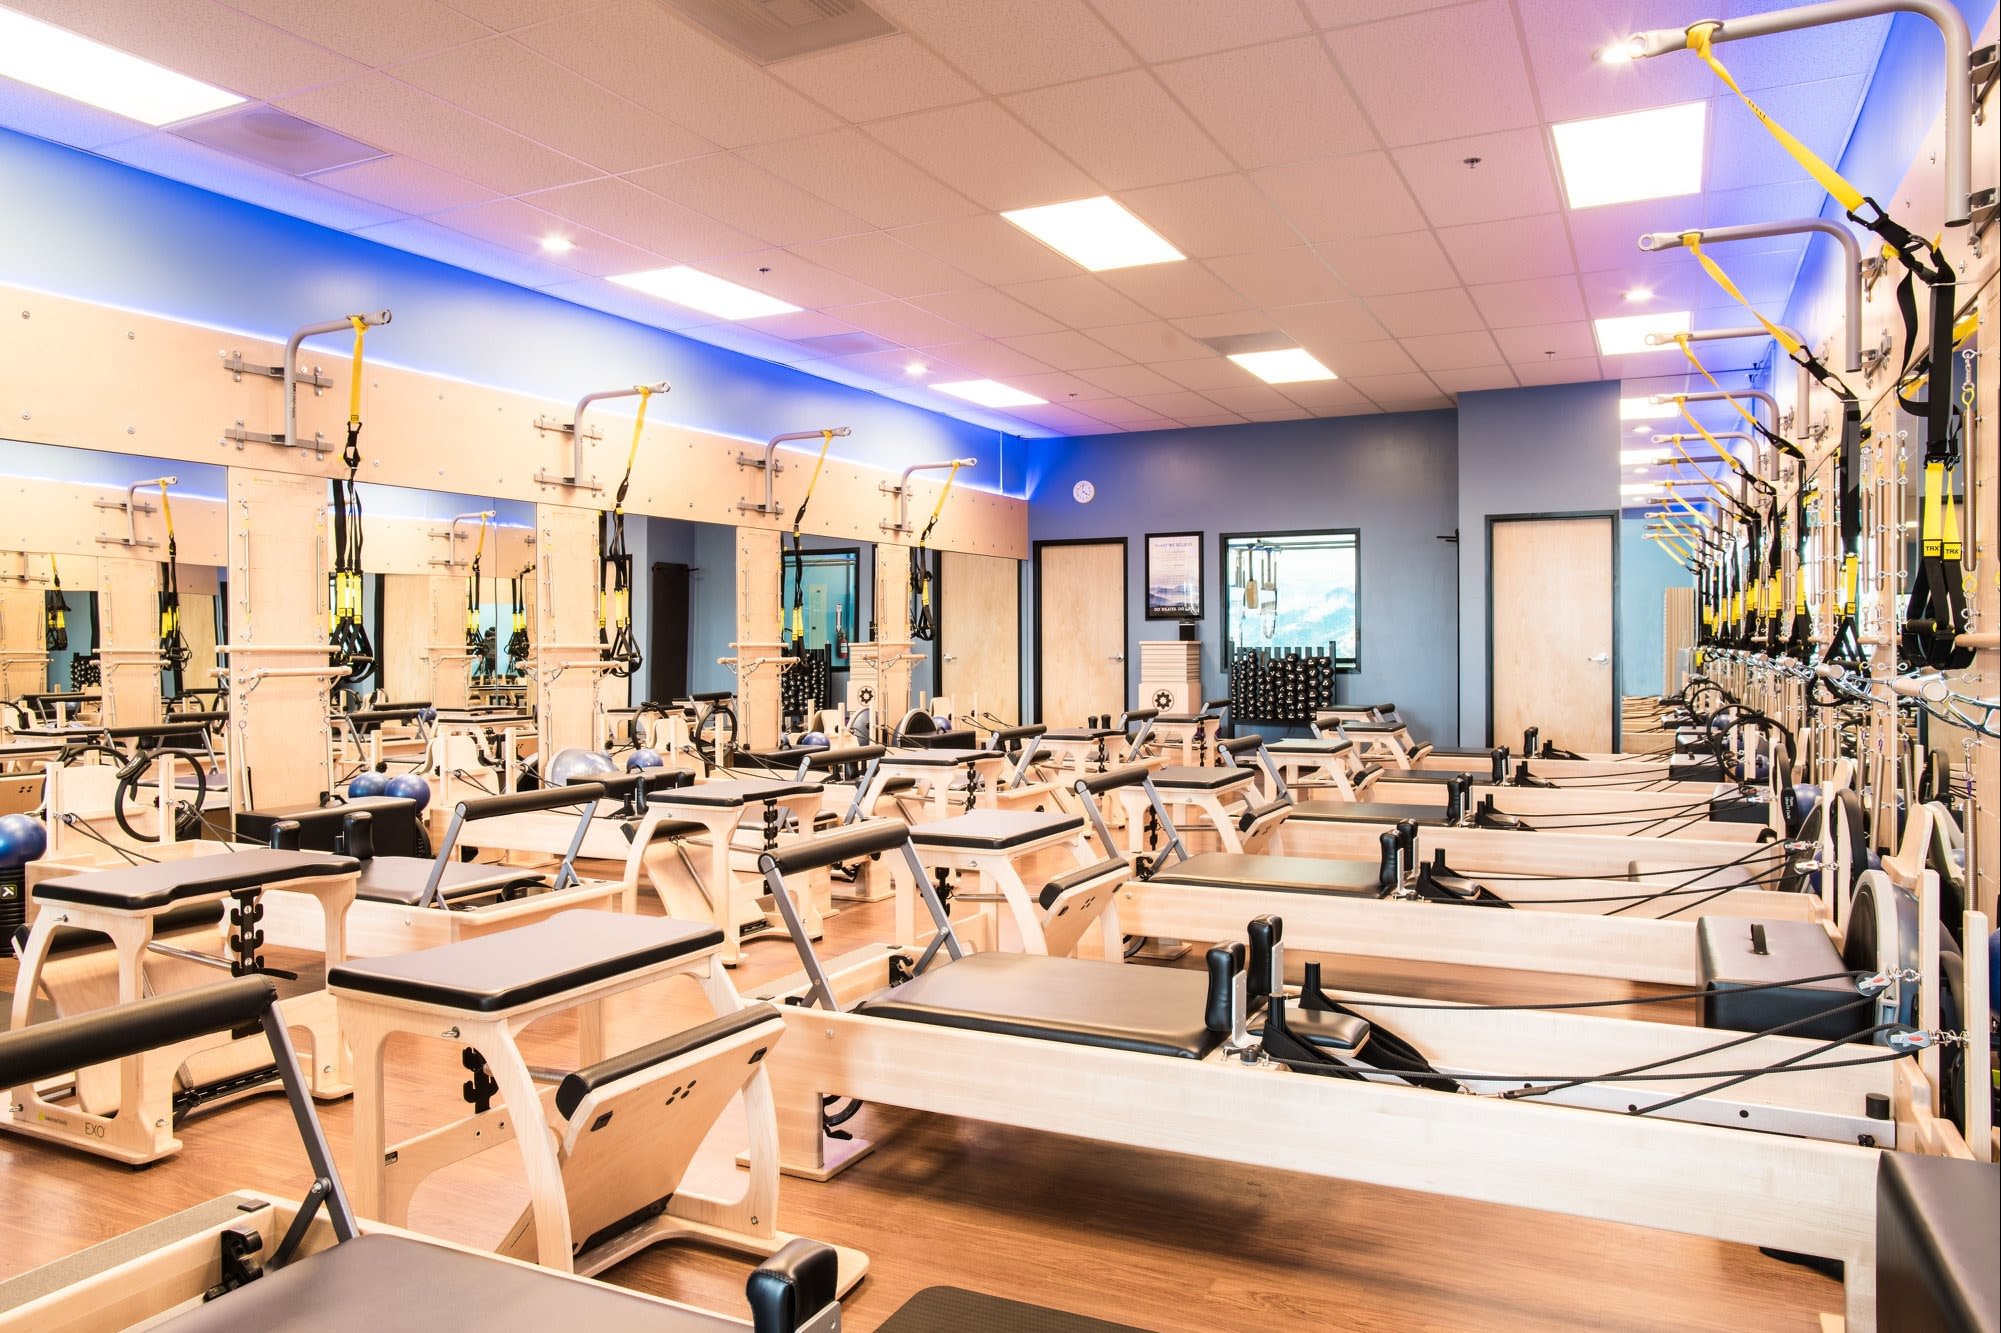 Club Pilates North Brunswick Now Open - The Shoppes At North Brunswick